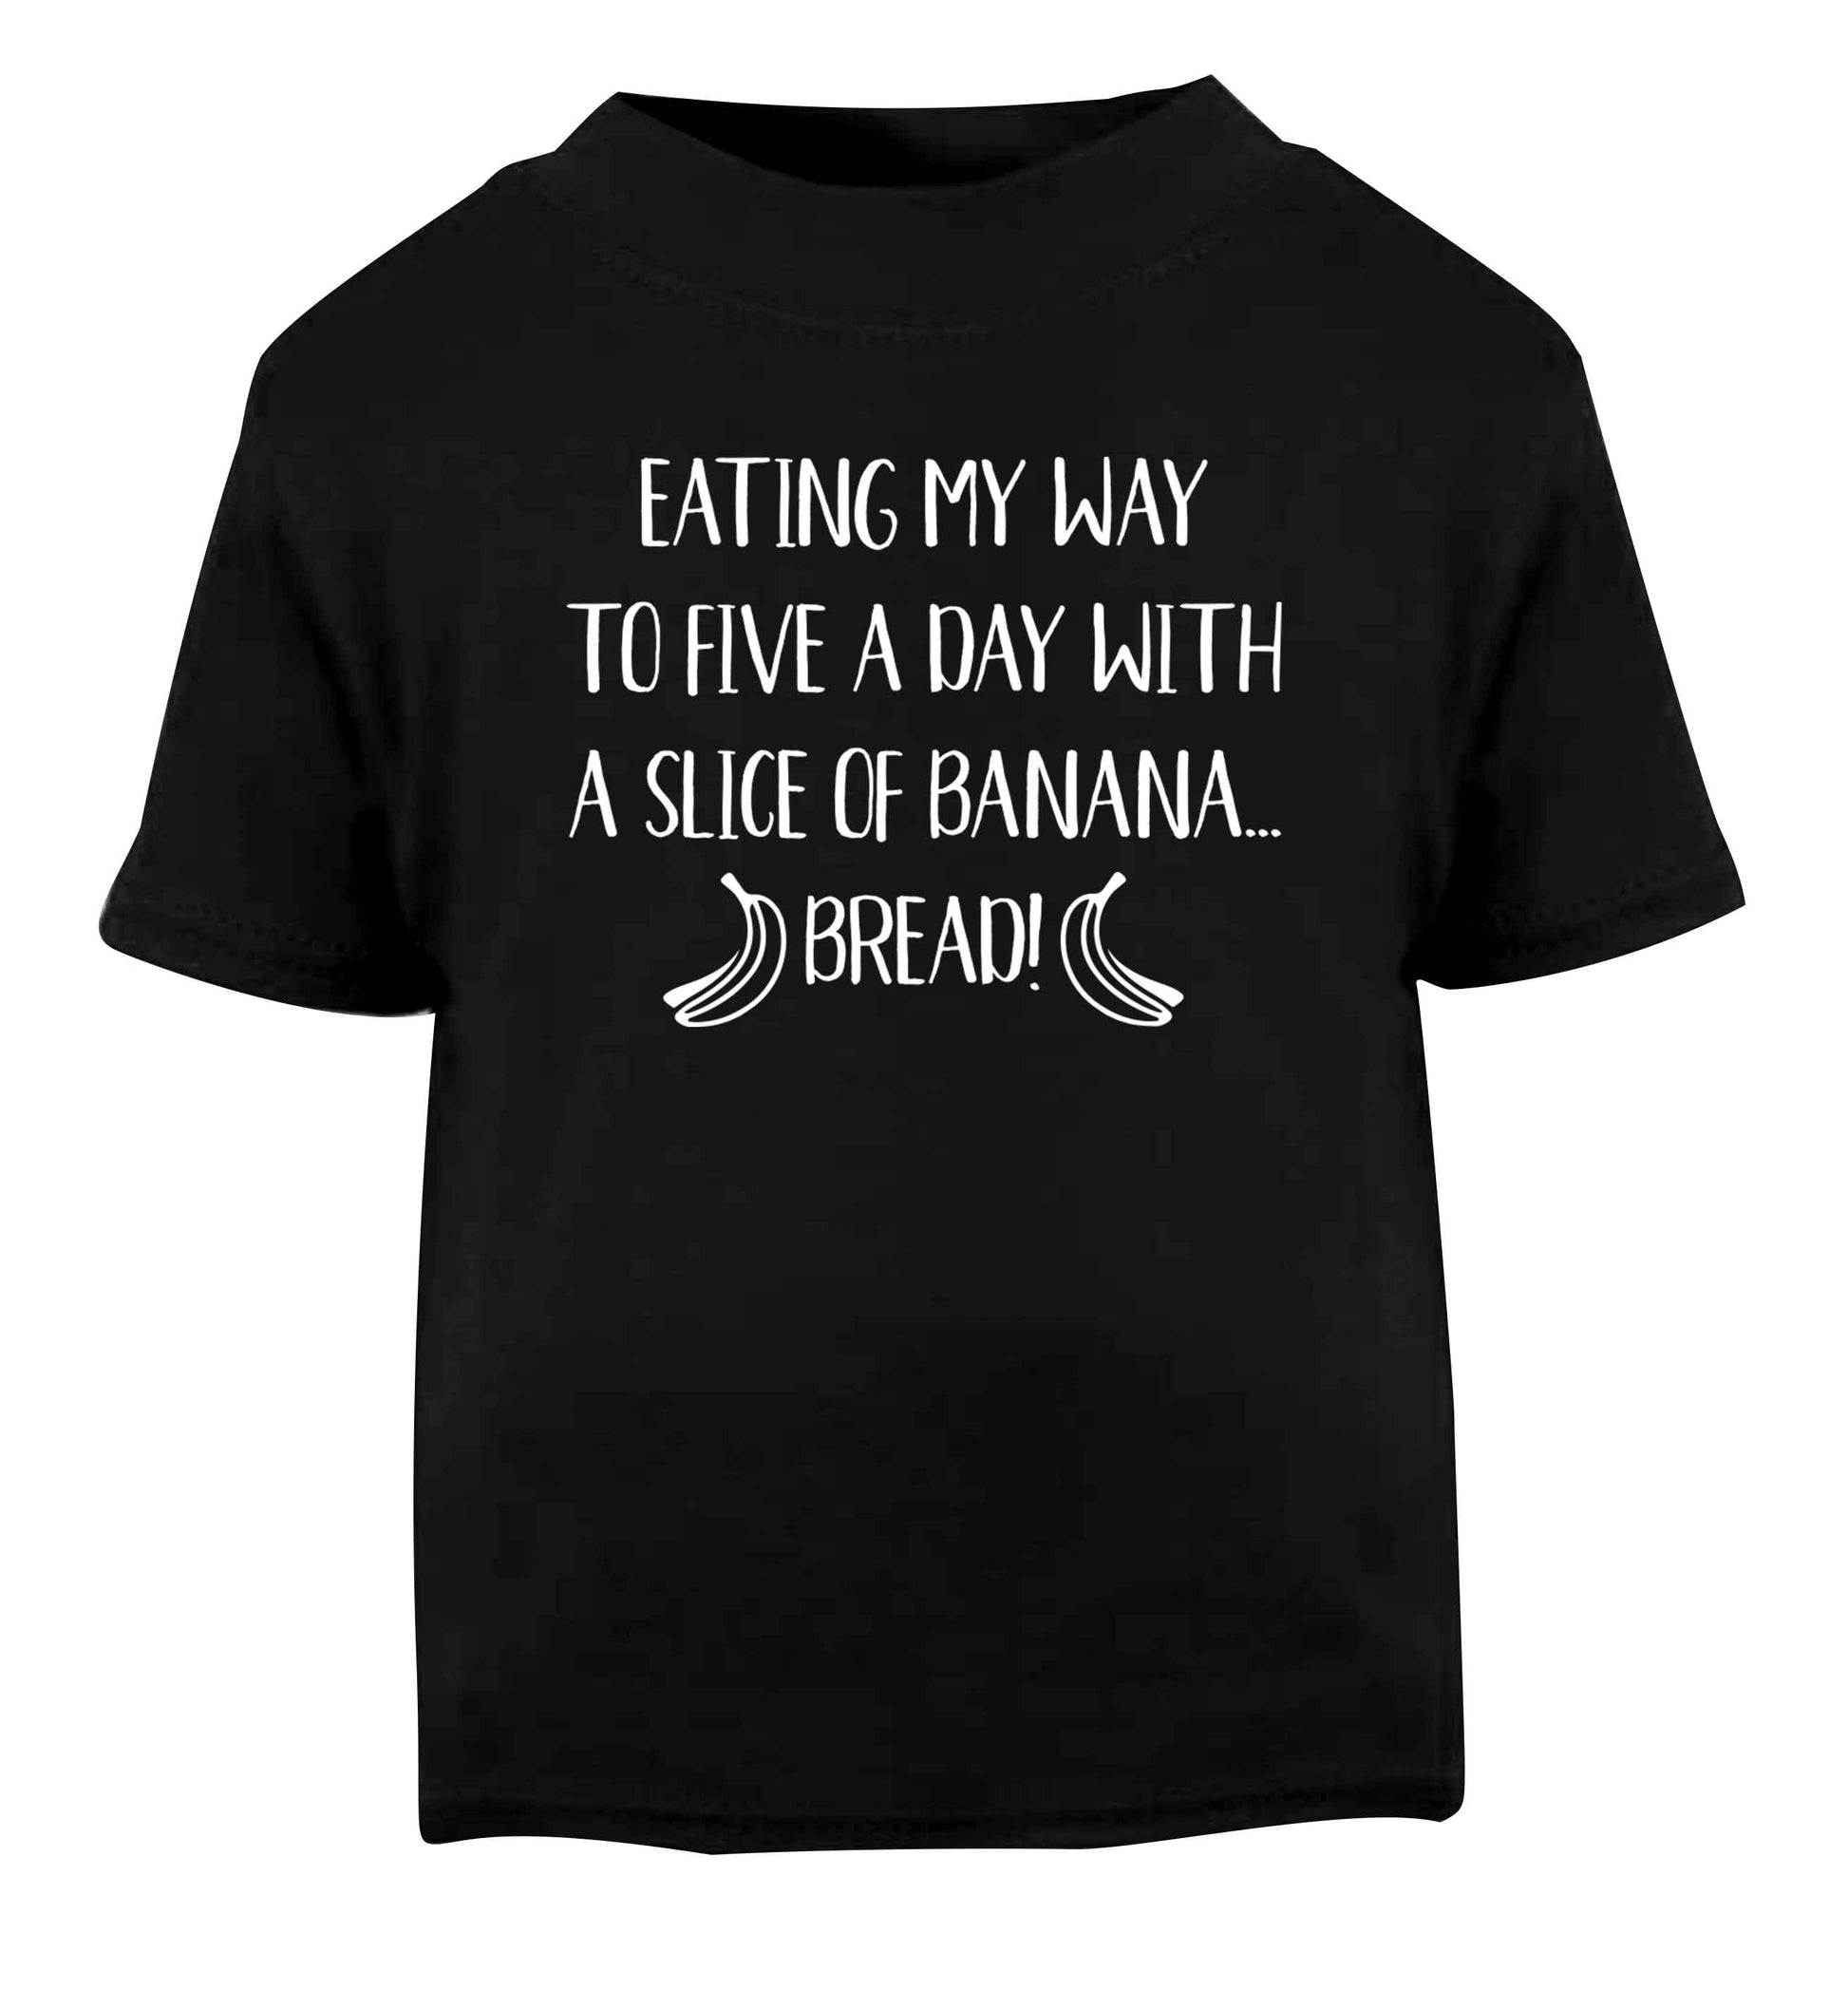 Eating my way to five a day with a slice of banana bread Black Baby Toddler Tshirt 2 years